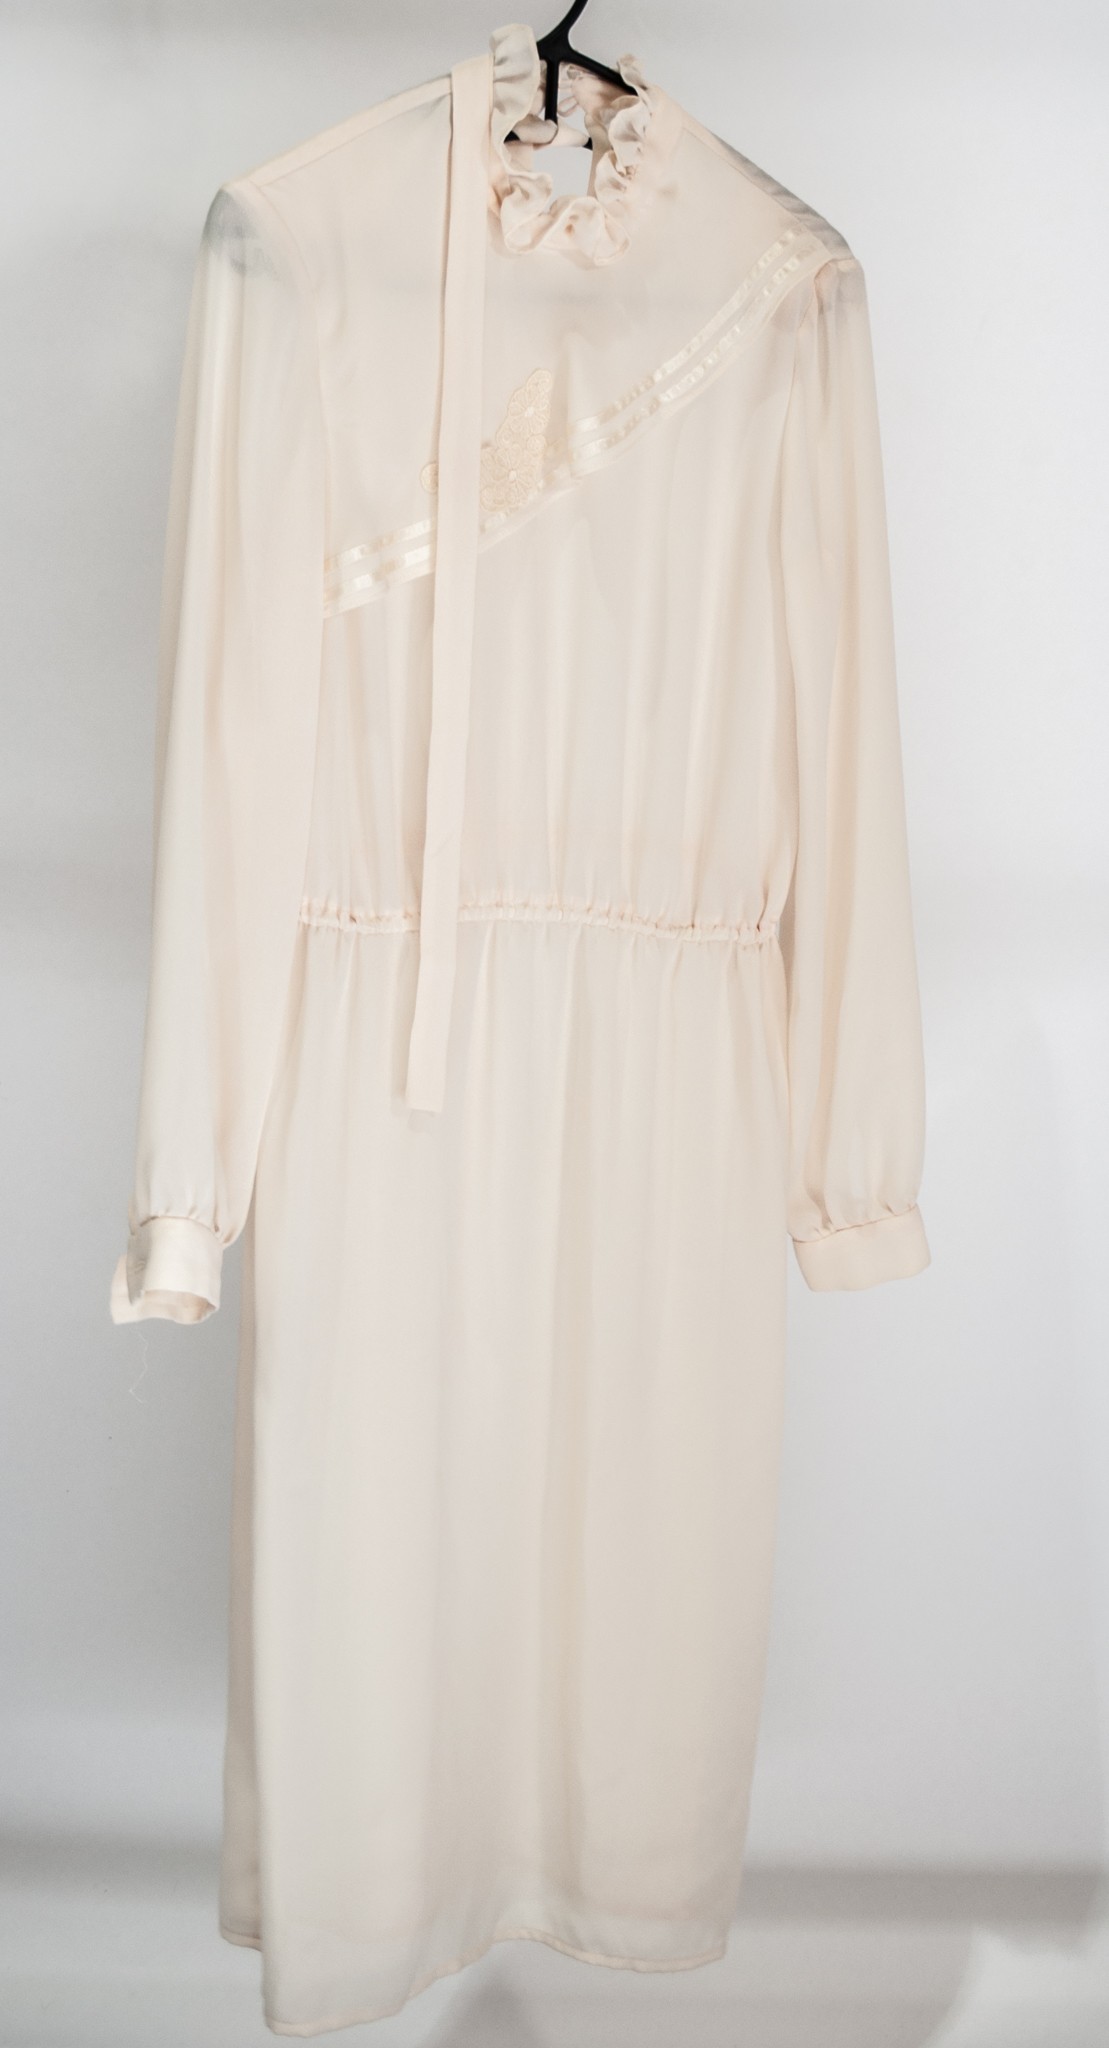 Girls velvet dress, cape and hat, 1950s blouse and a cream crepe dress. - Image 2 of 2